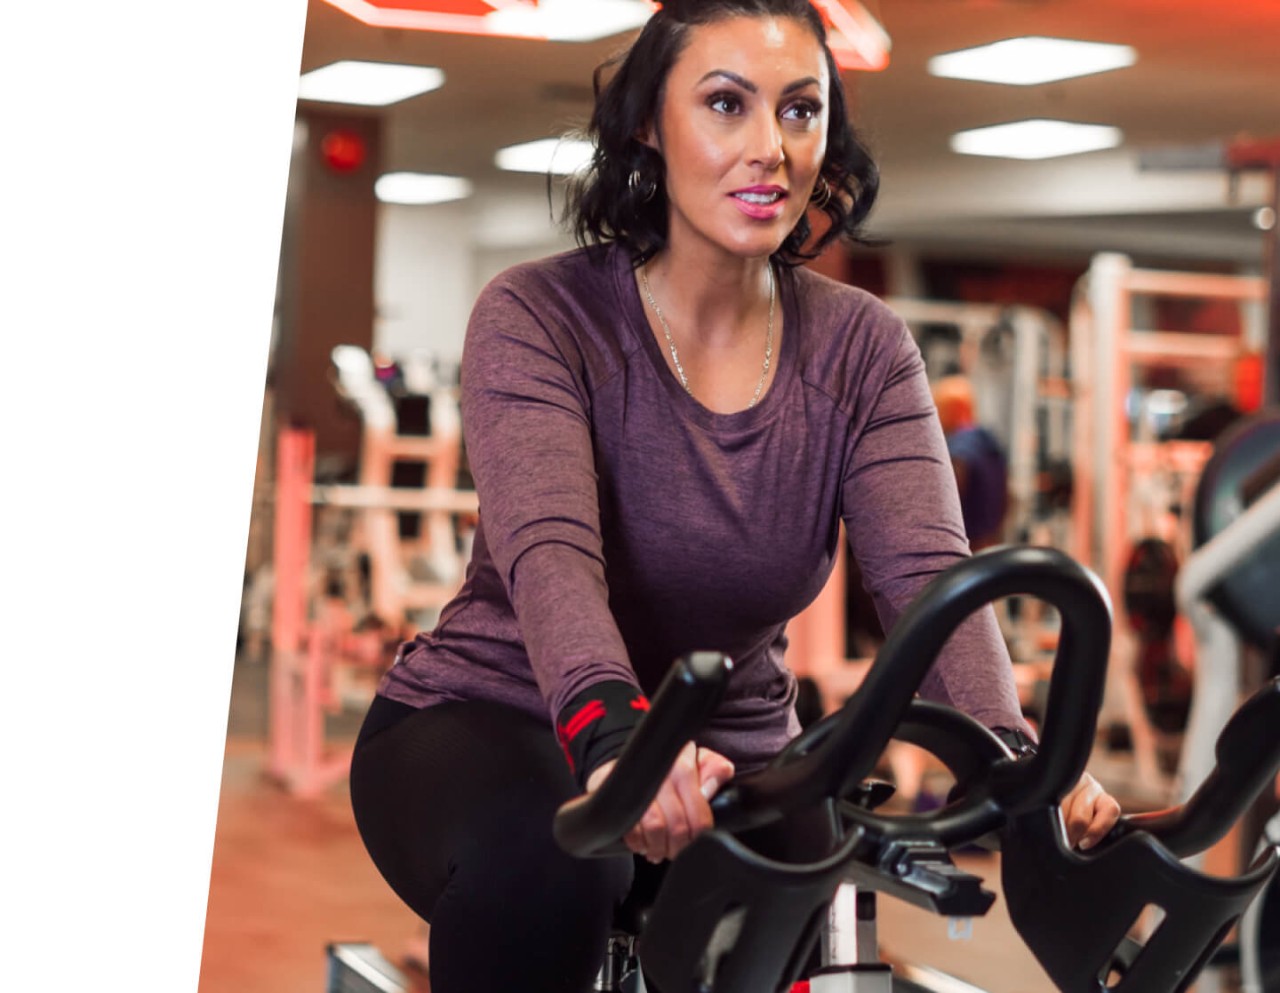 Woman in purple long-sleeved shirt trains on stationary bicycle